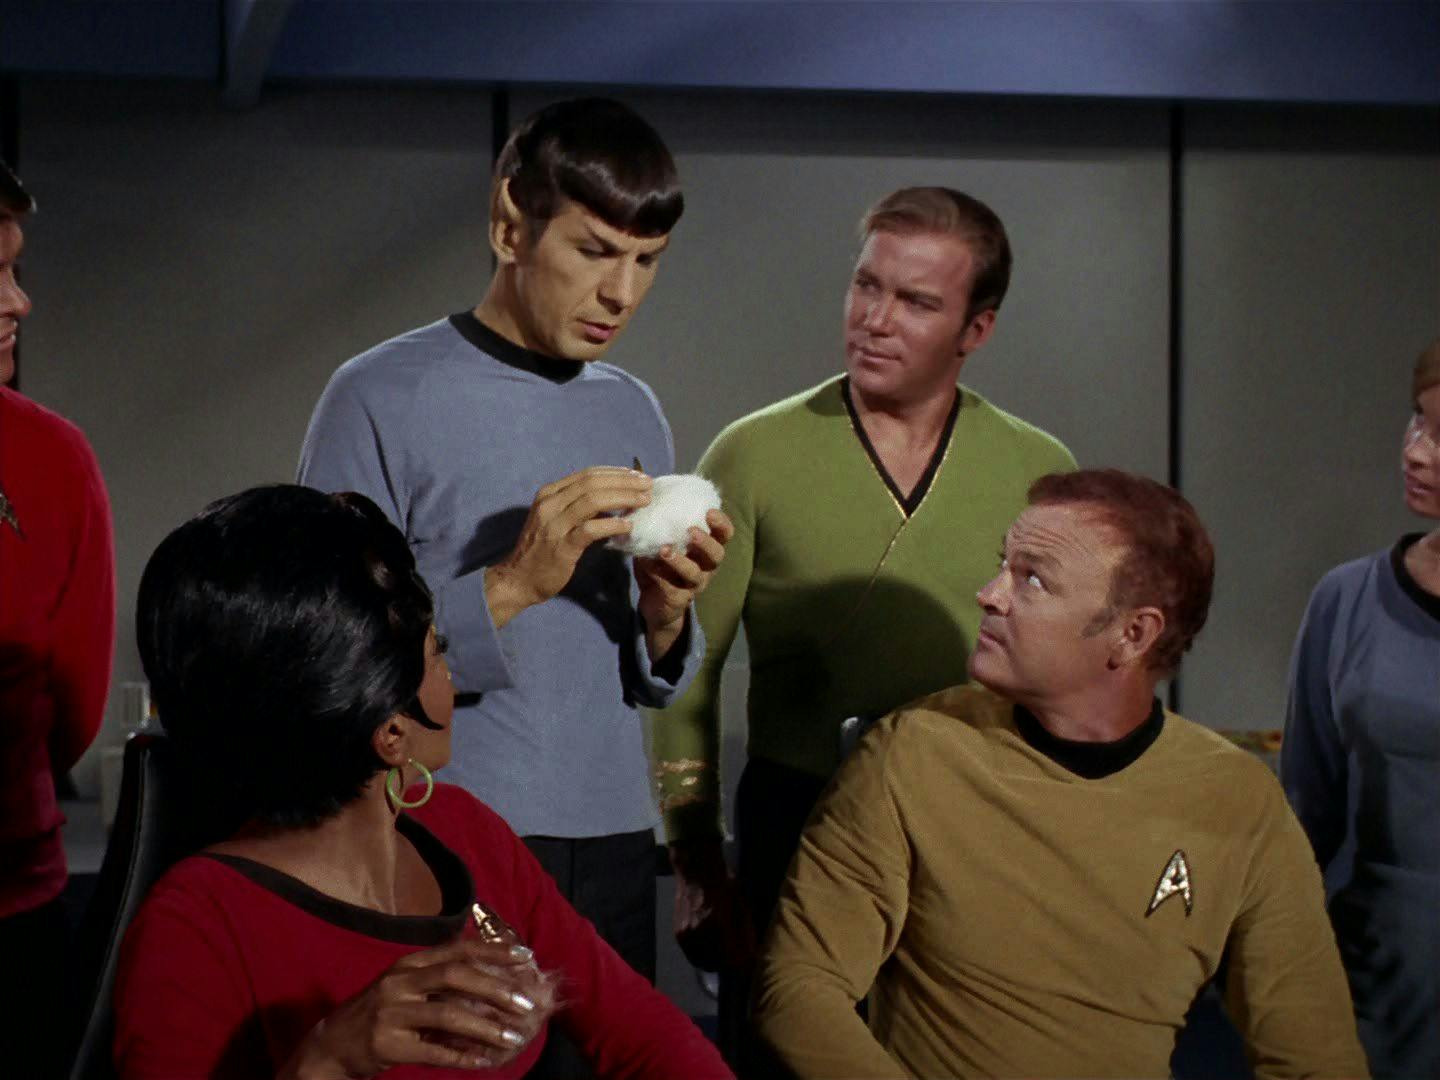 Spock cuddles a tribble as Kirk, Uhura, and another crewmember look on.